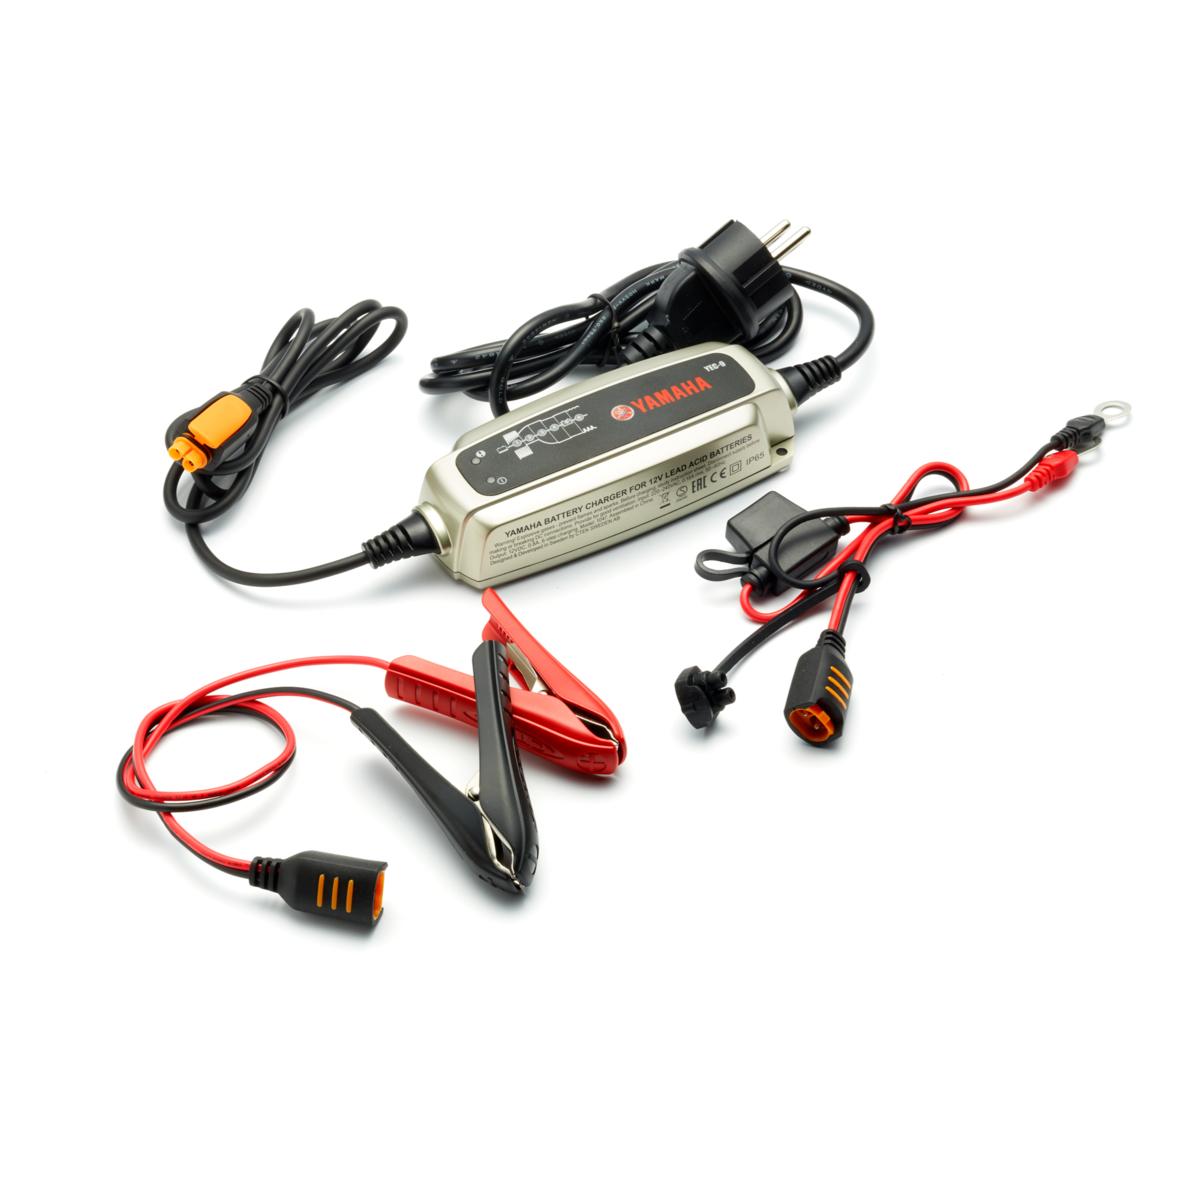 6-step charger that can charge the battery of your Yamaha motorcycle, scooter, ATV, SMB and/or marine products. Applicable to European markets only.